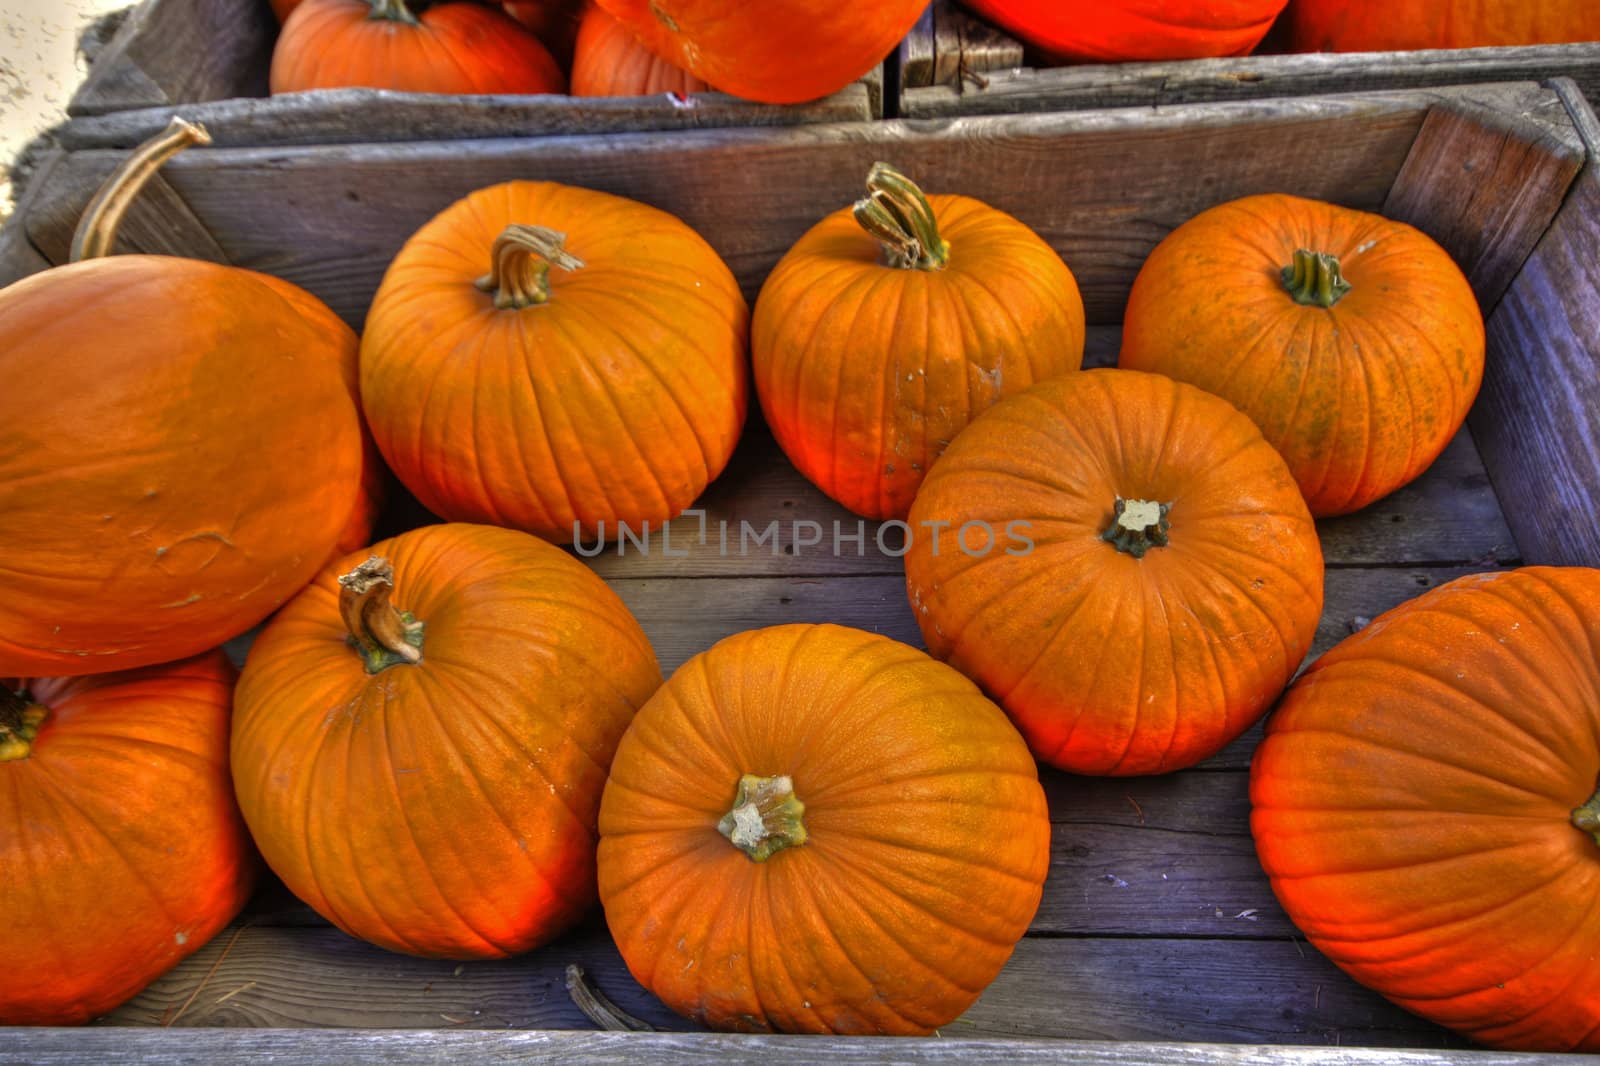 Crate of pumpkins on a sunny day in a farmer's market